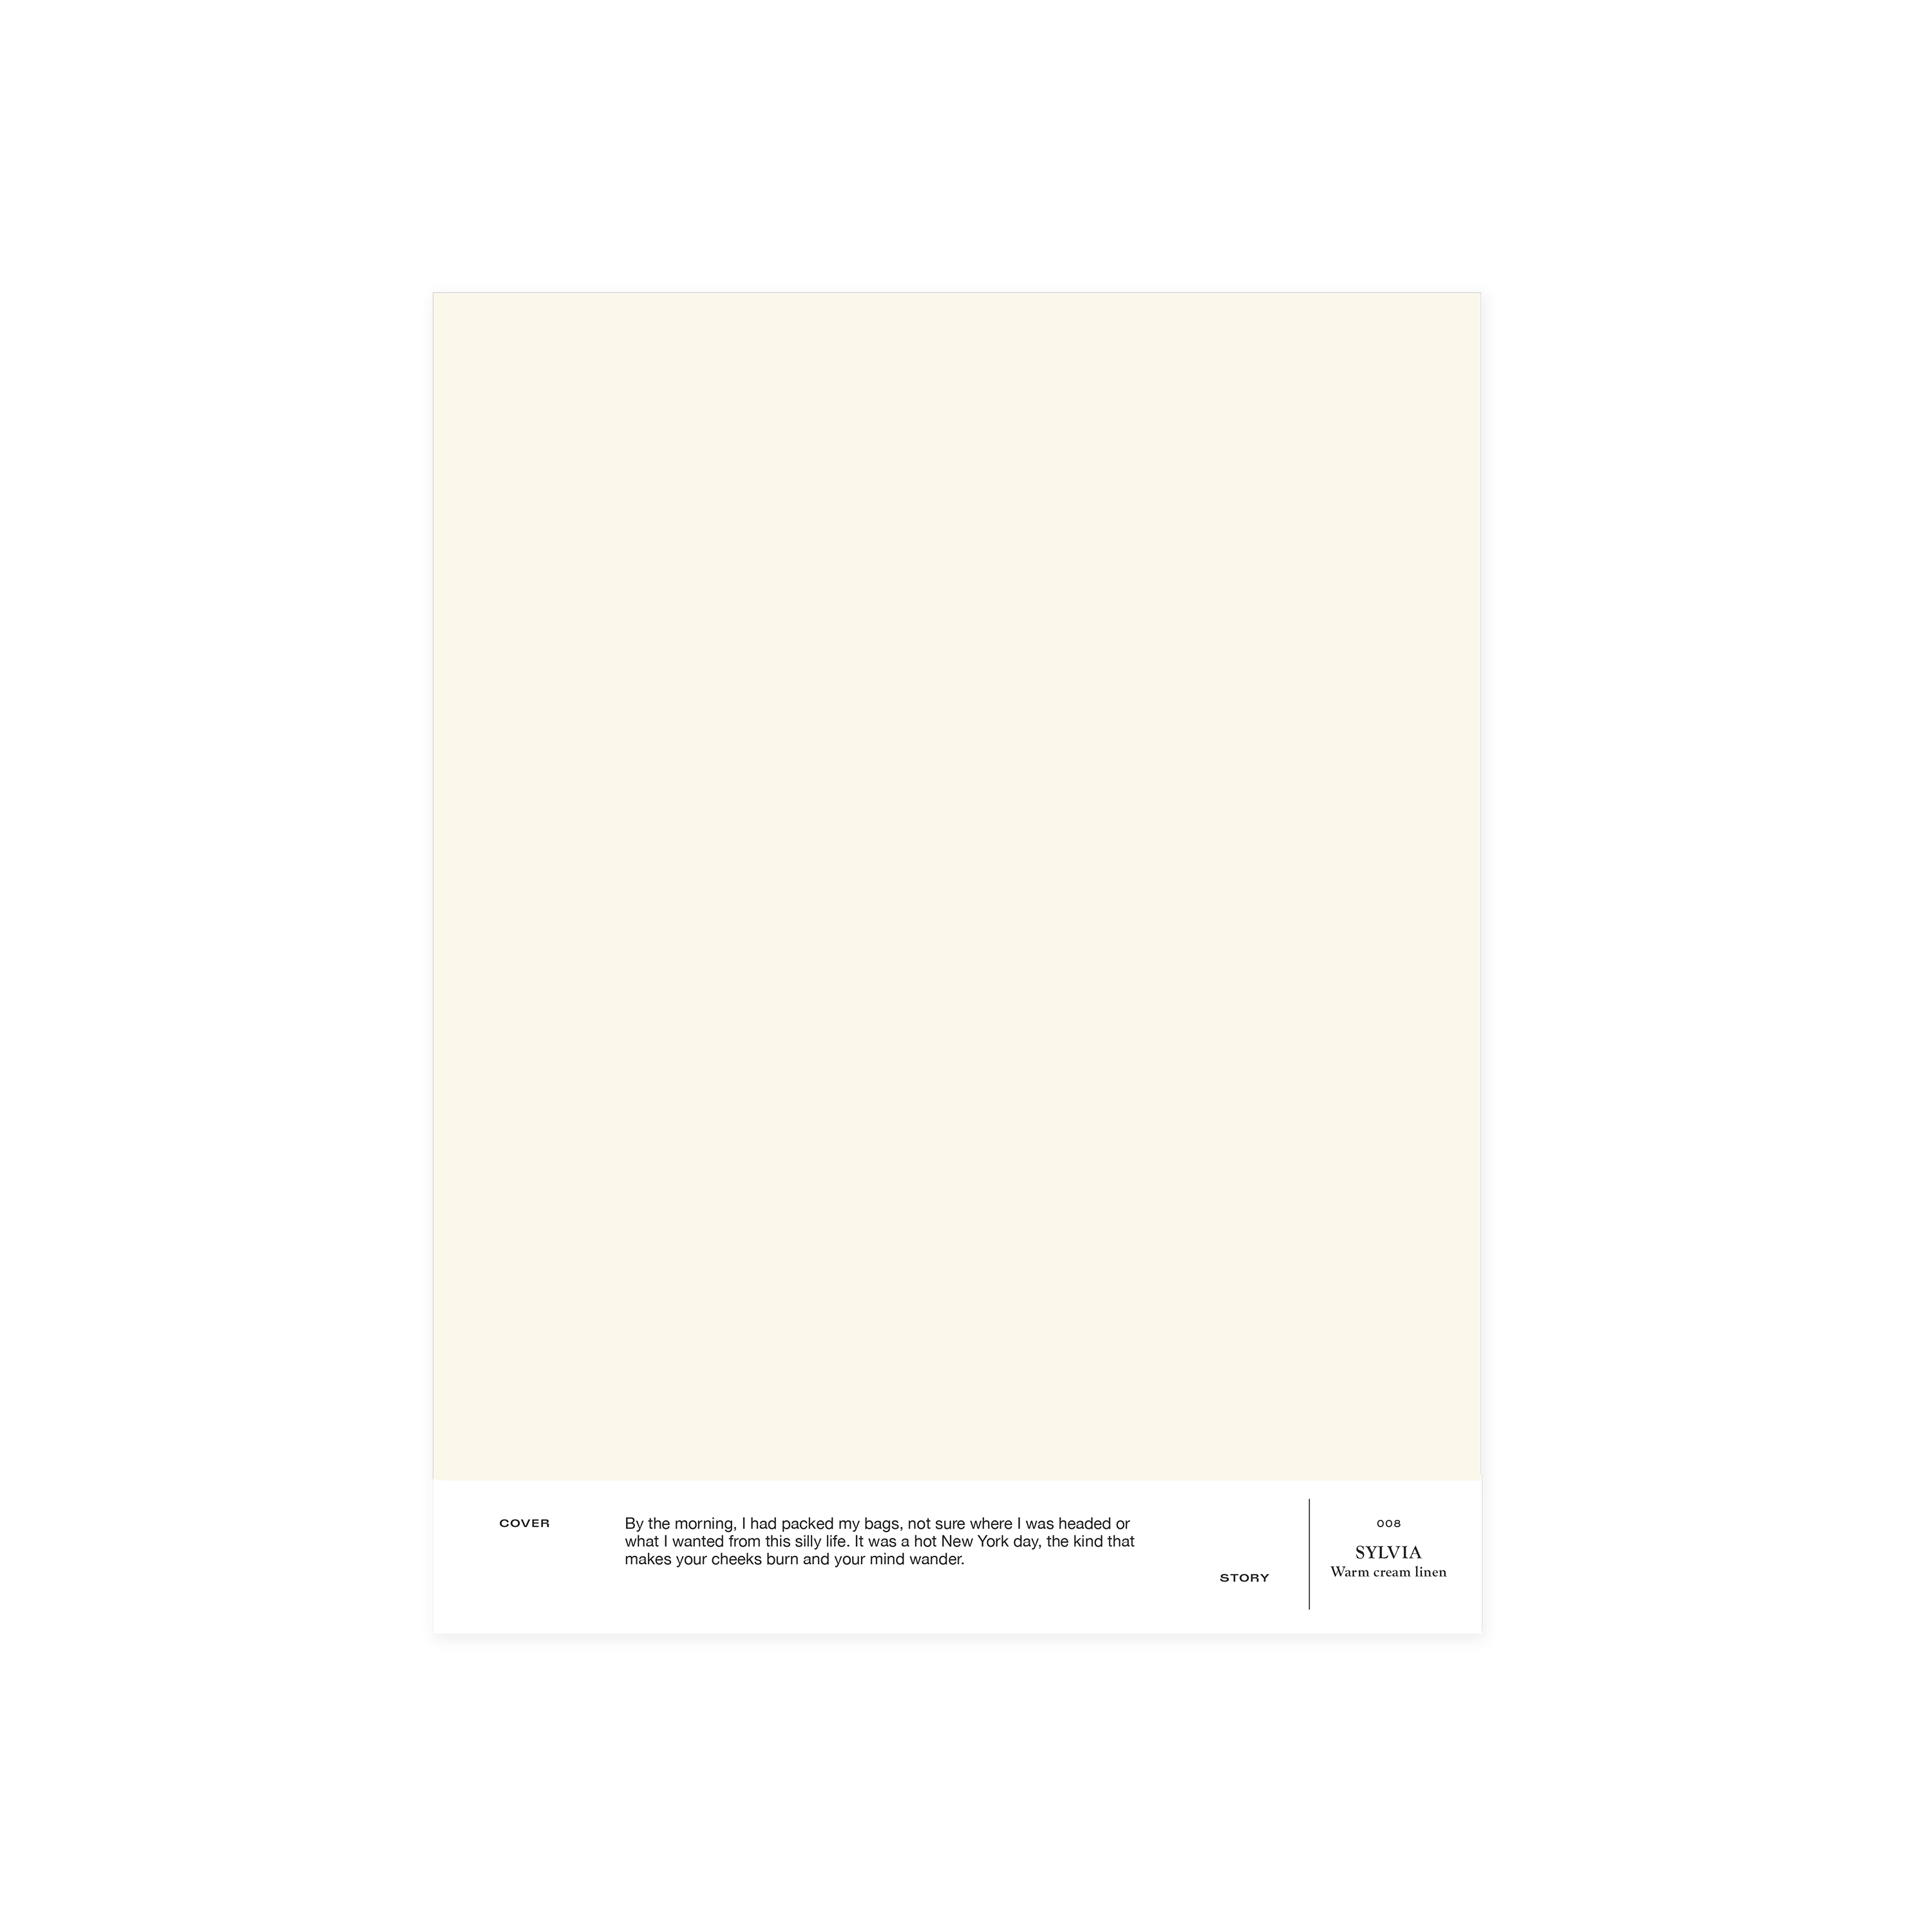 Marble white interior paint Cover Story 008 SYLVIA